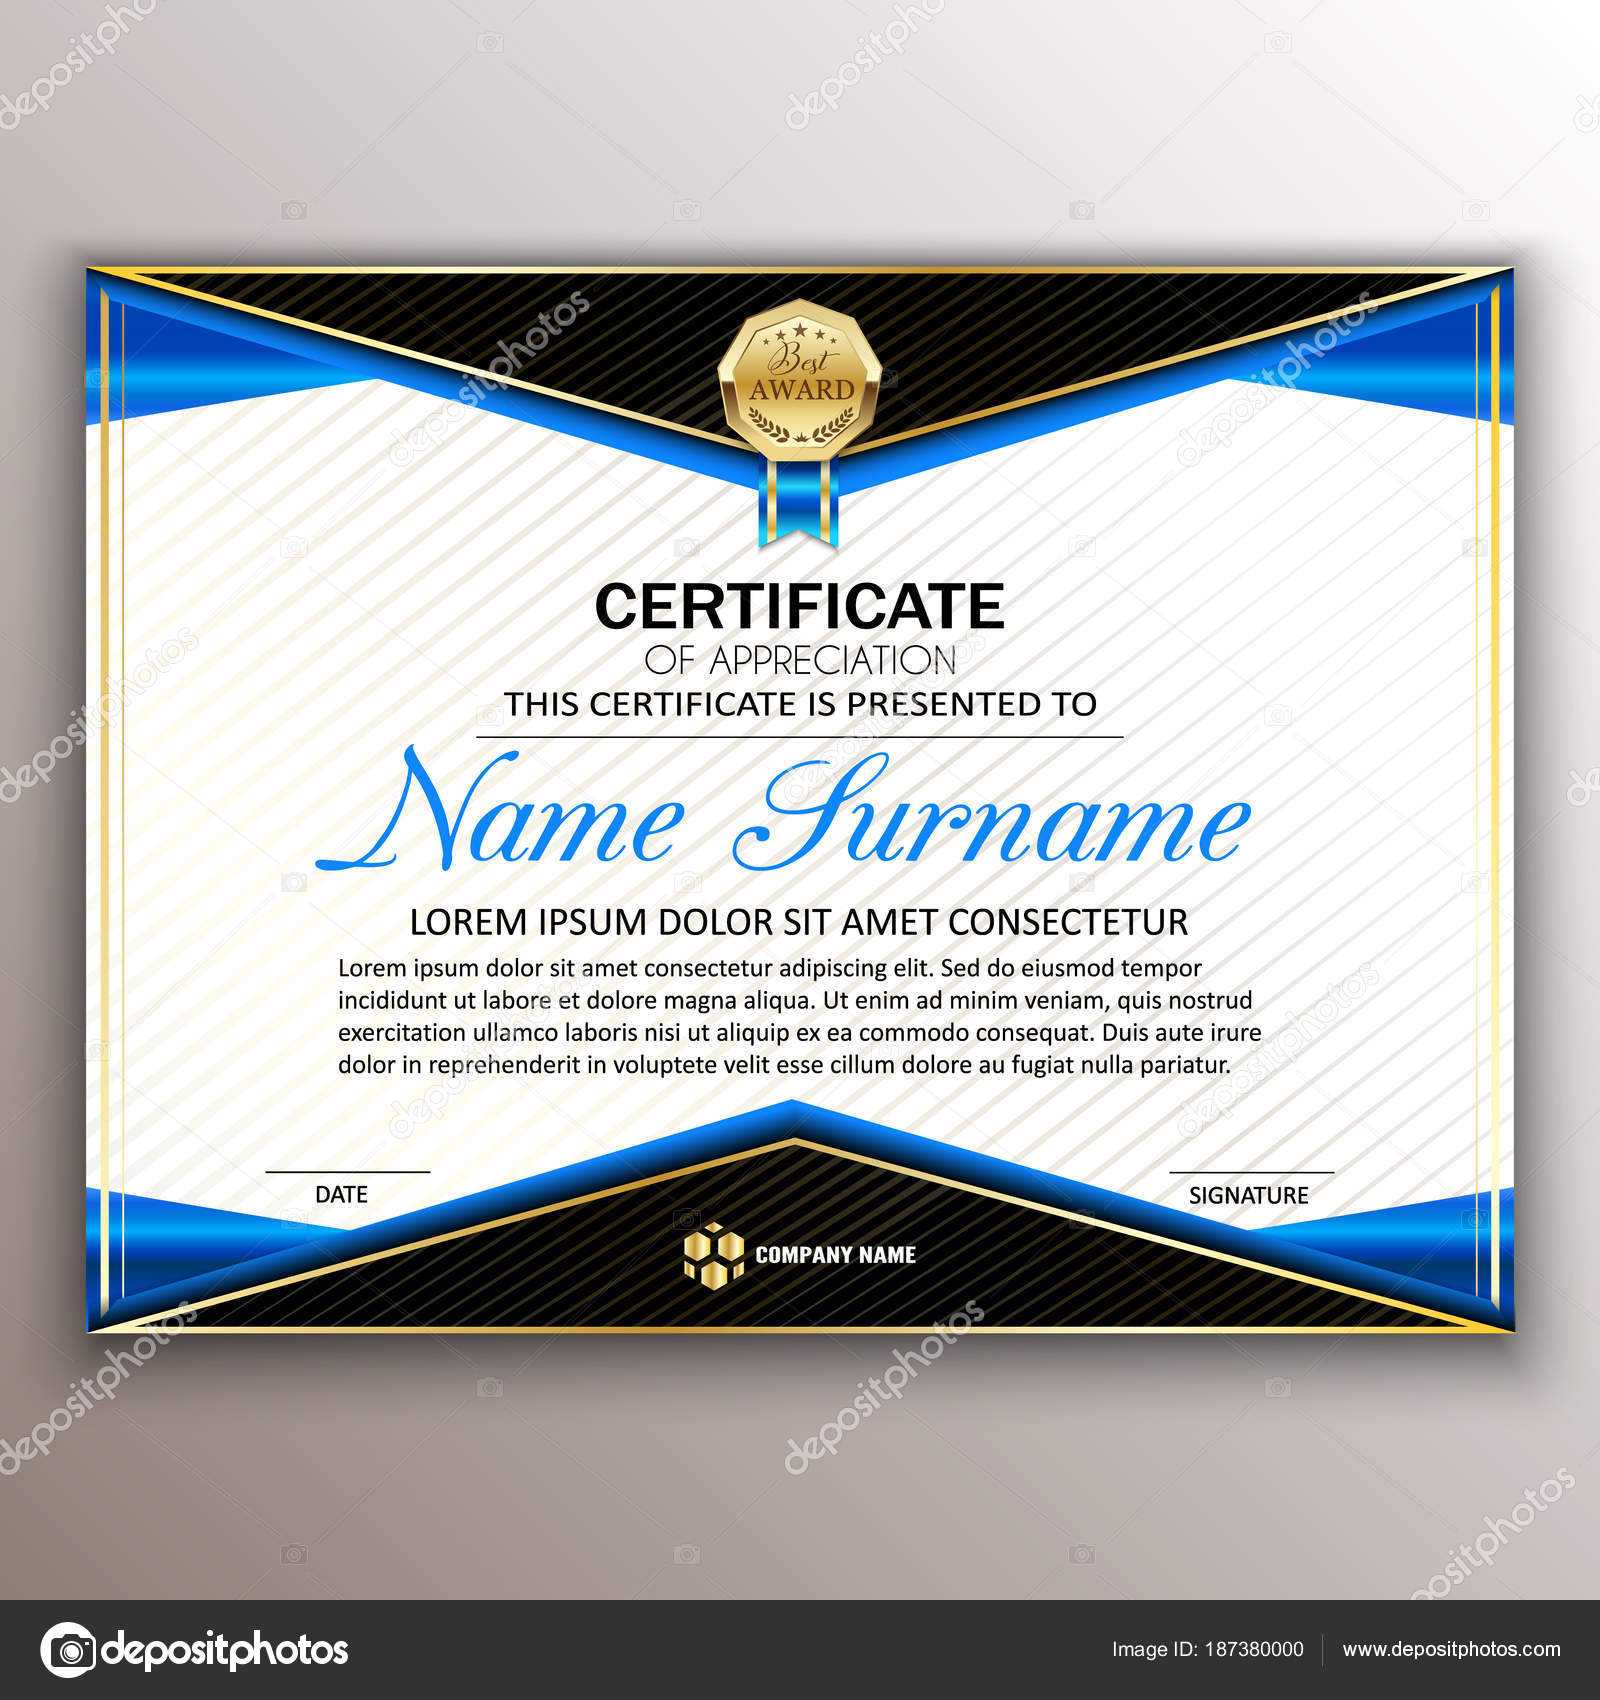 Beautiful Certificate Template Design With Best Award Symbol Intended For Beautiful Certificate Templates